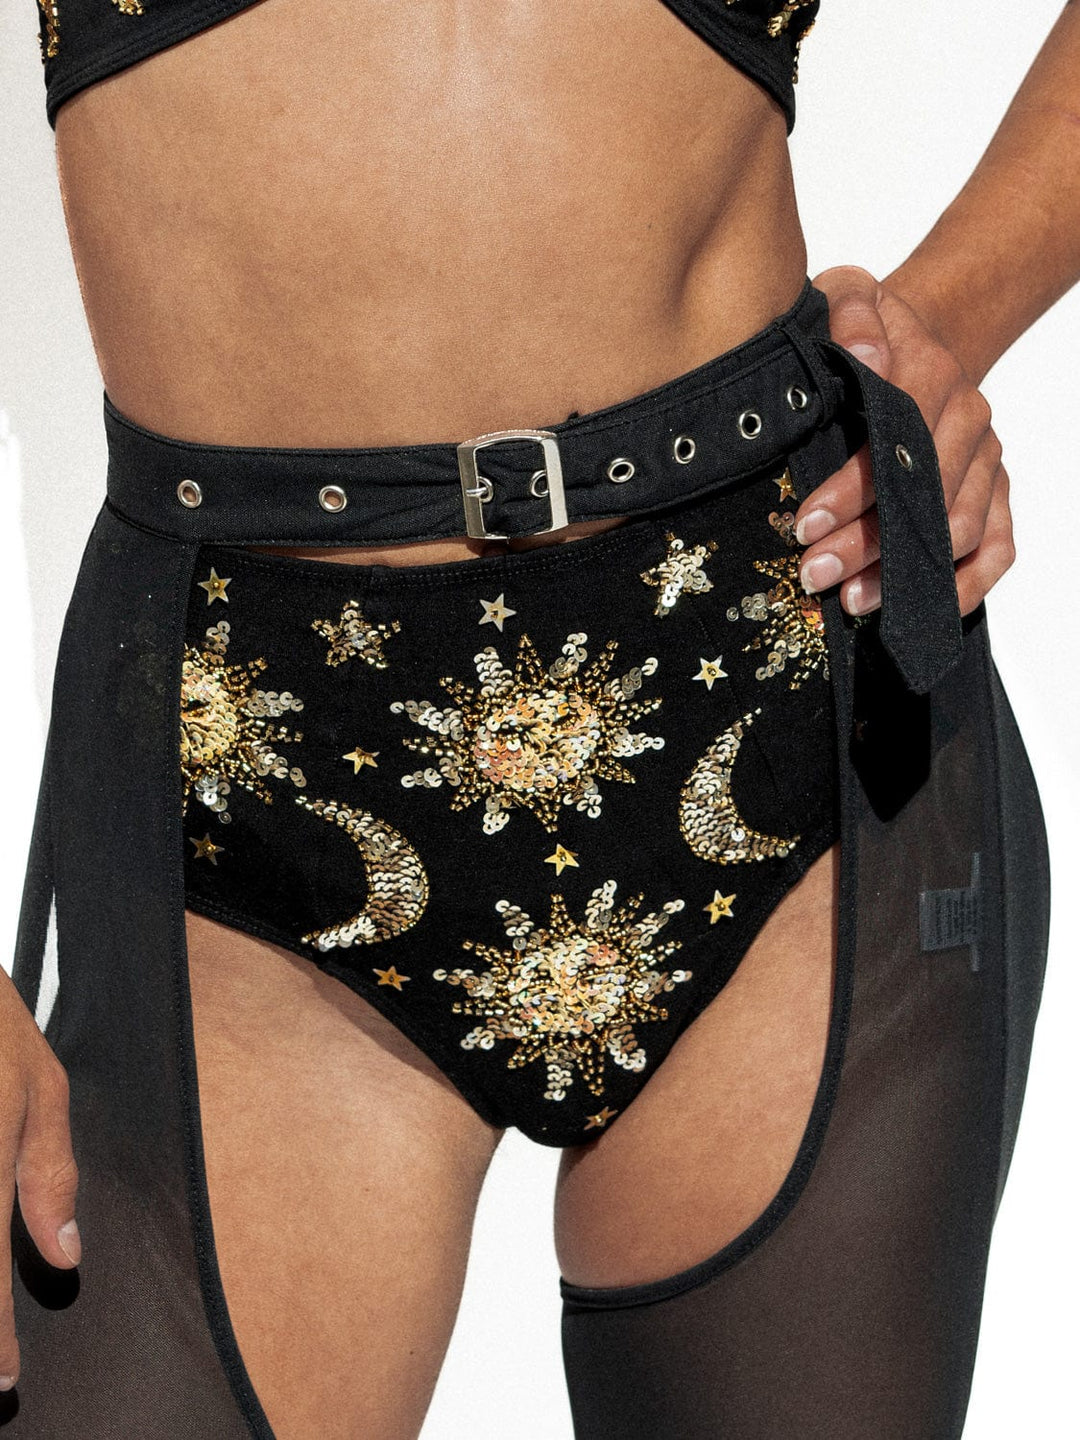 STELLA SEQUIN SPARKLE BLOOMERS - BLACK/GOLD - Her Pony